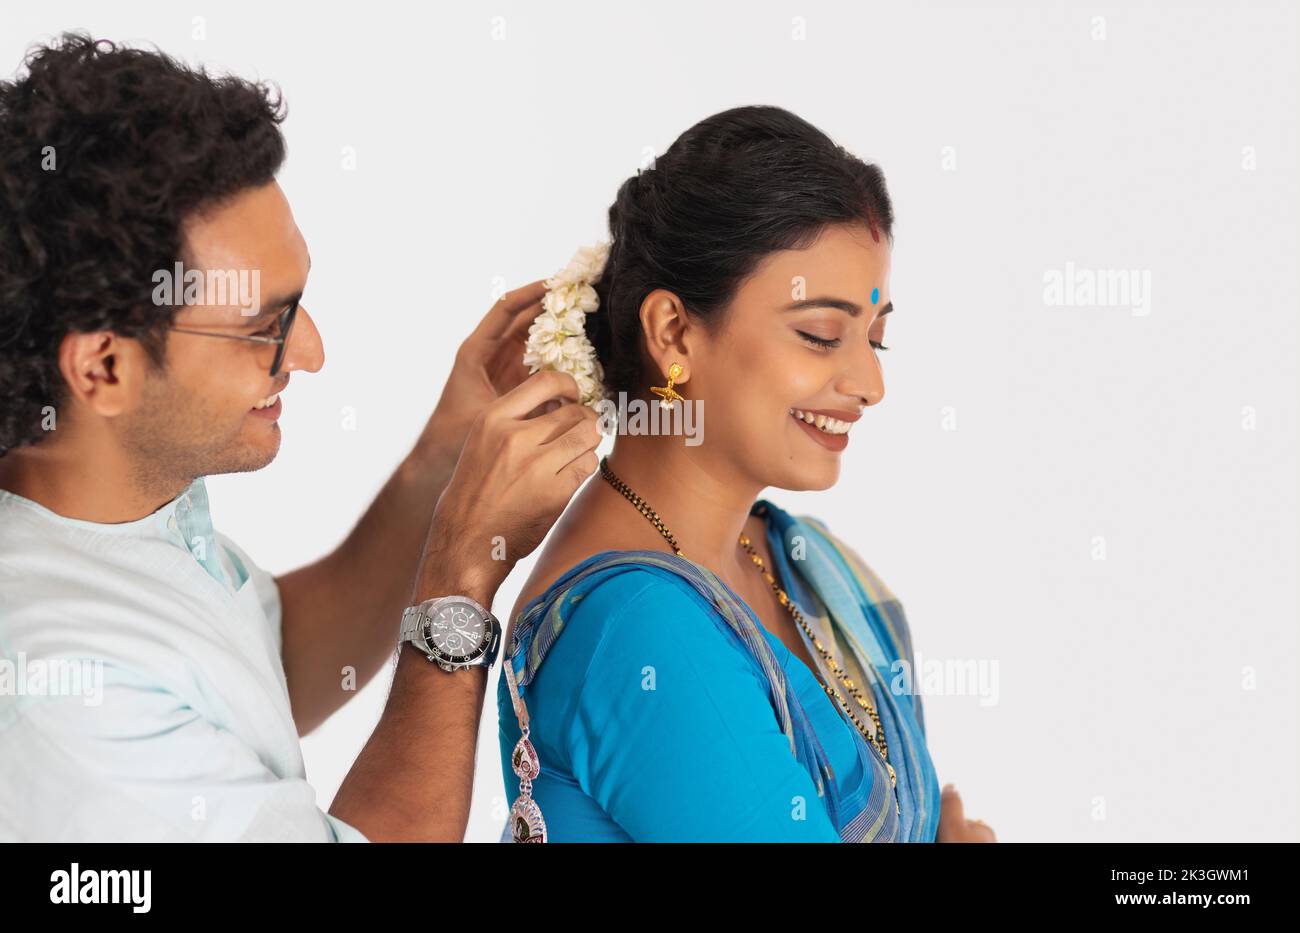 Loving husband putting flower in his wife's hair Stock Photo